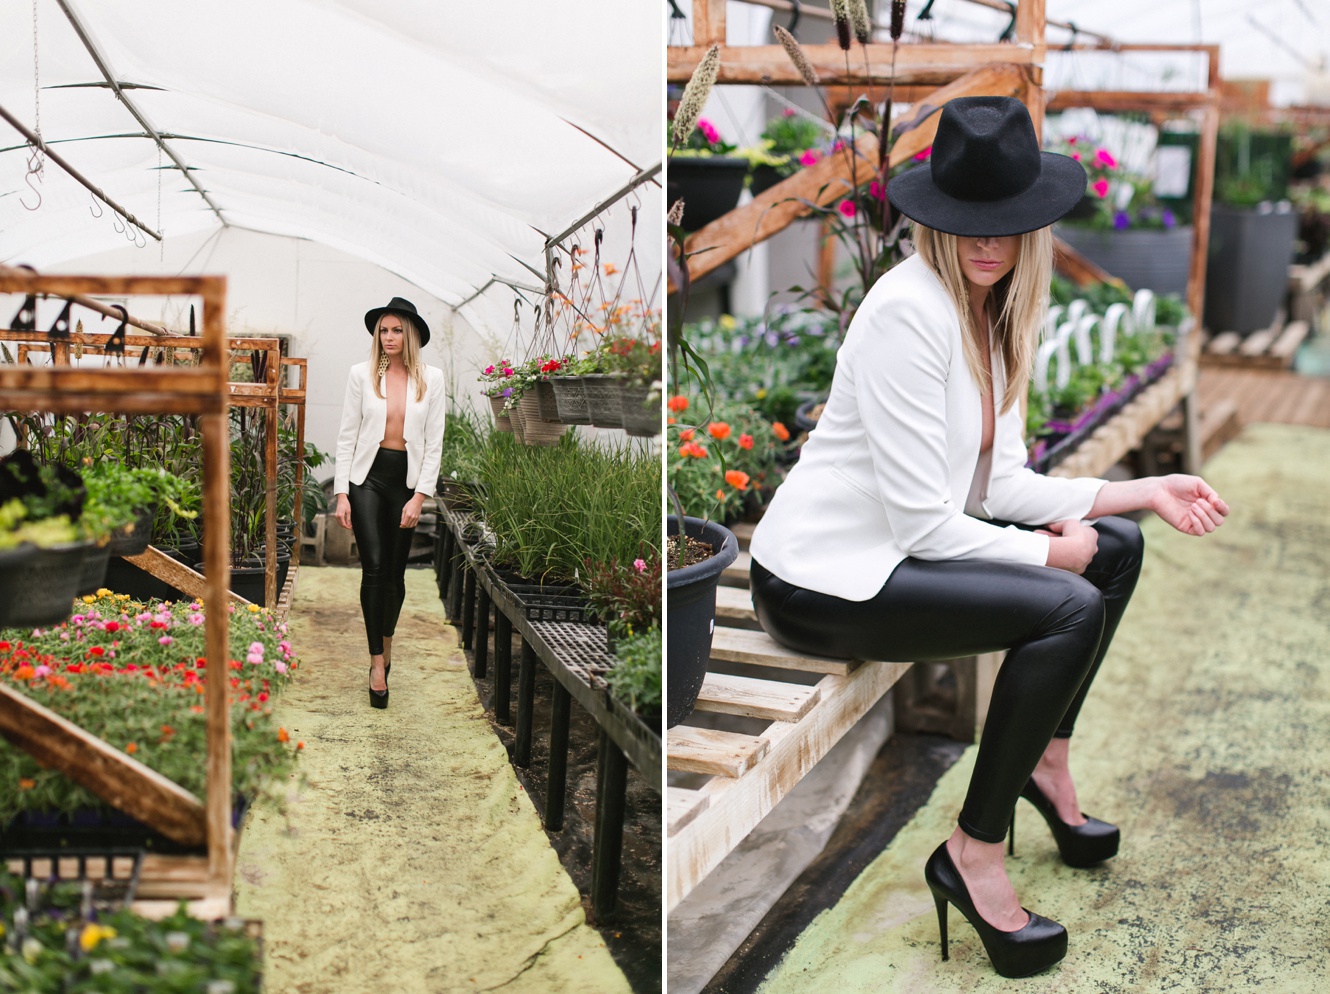 givenchy and yves saint laurent inspired fashion photo shoot in greenhouse